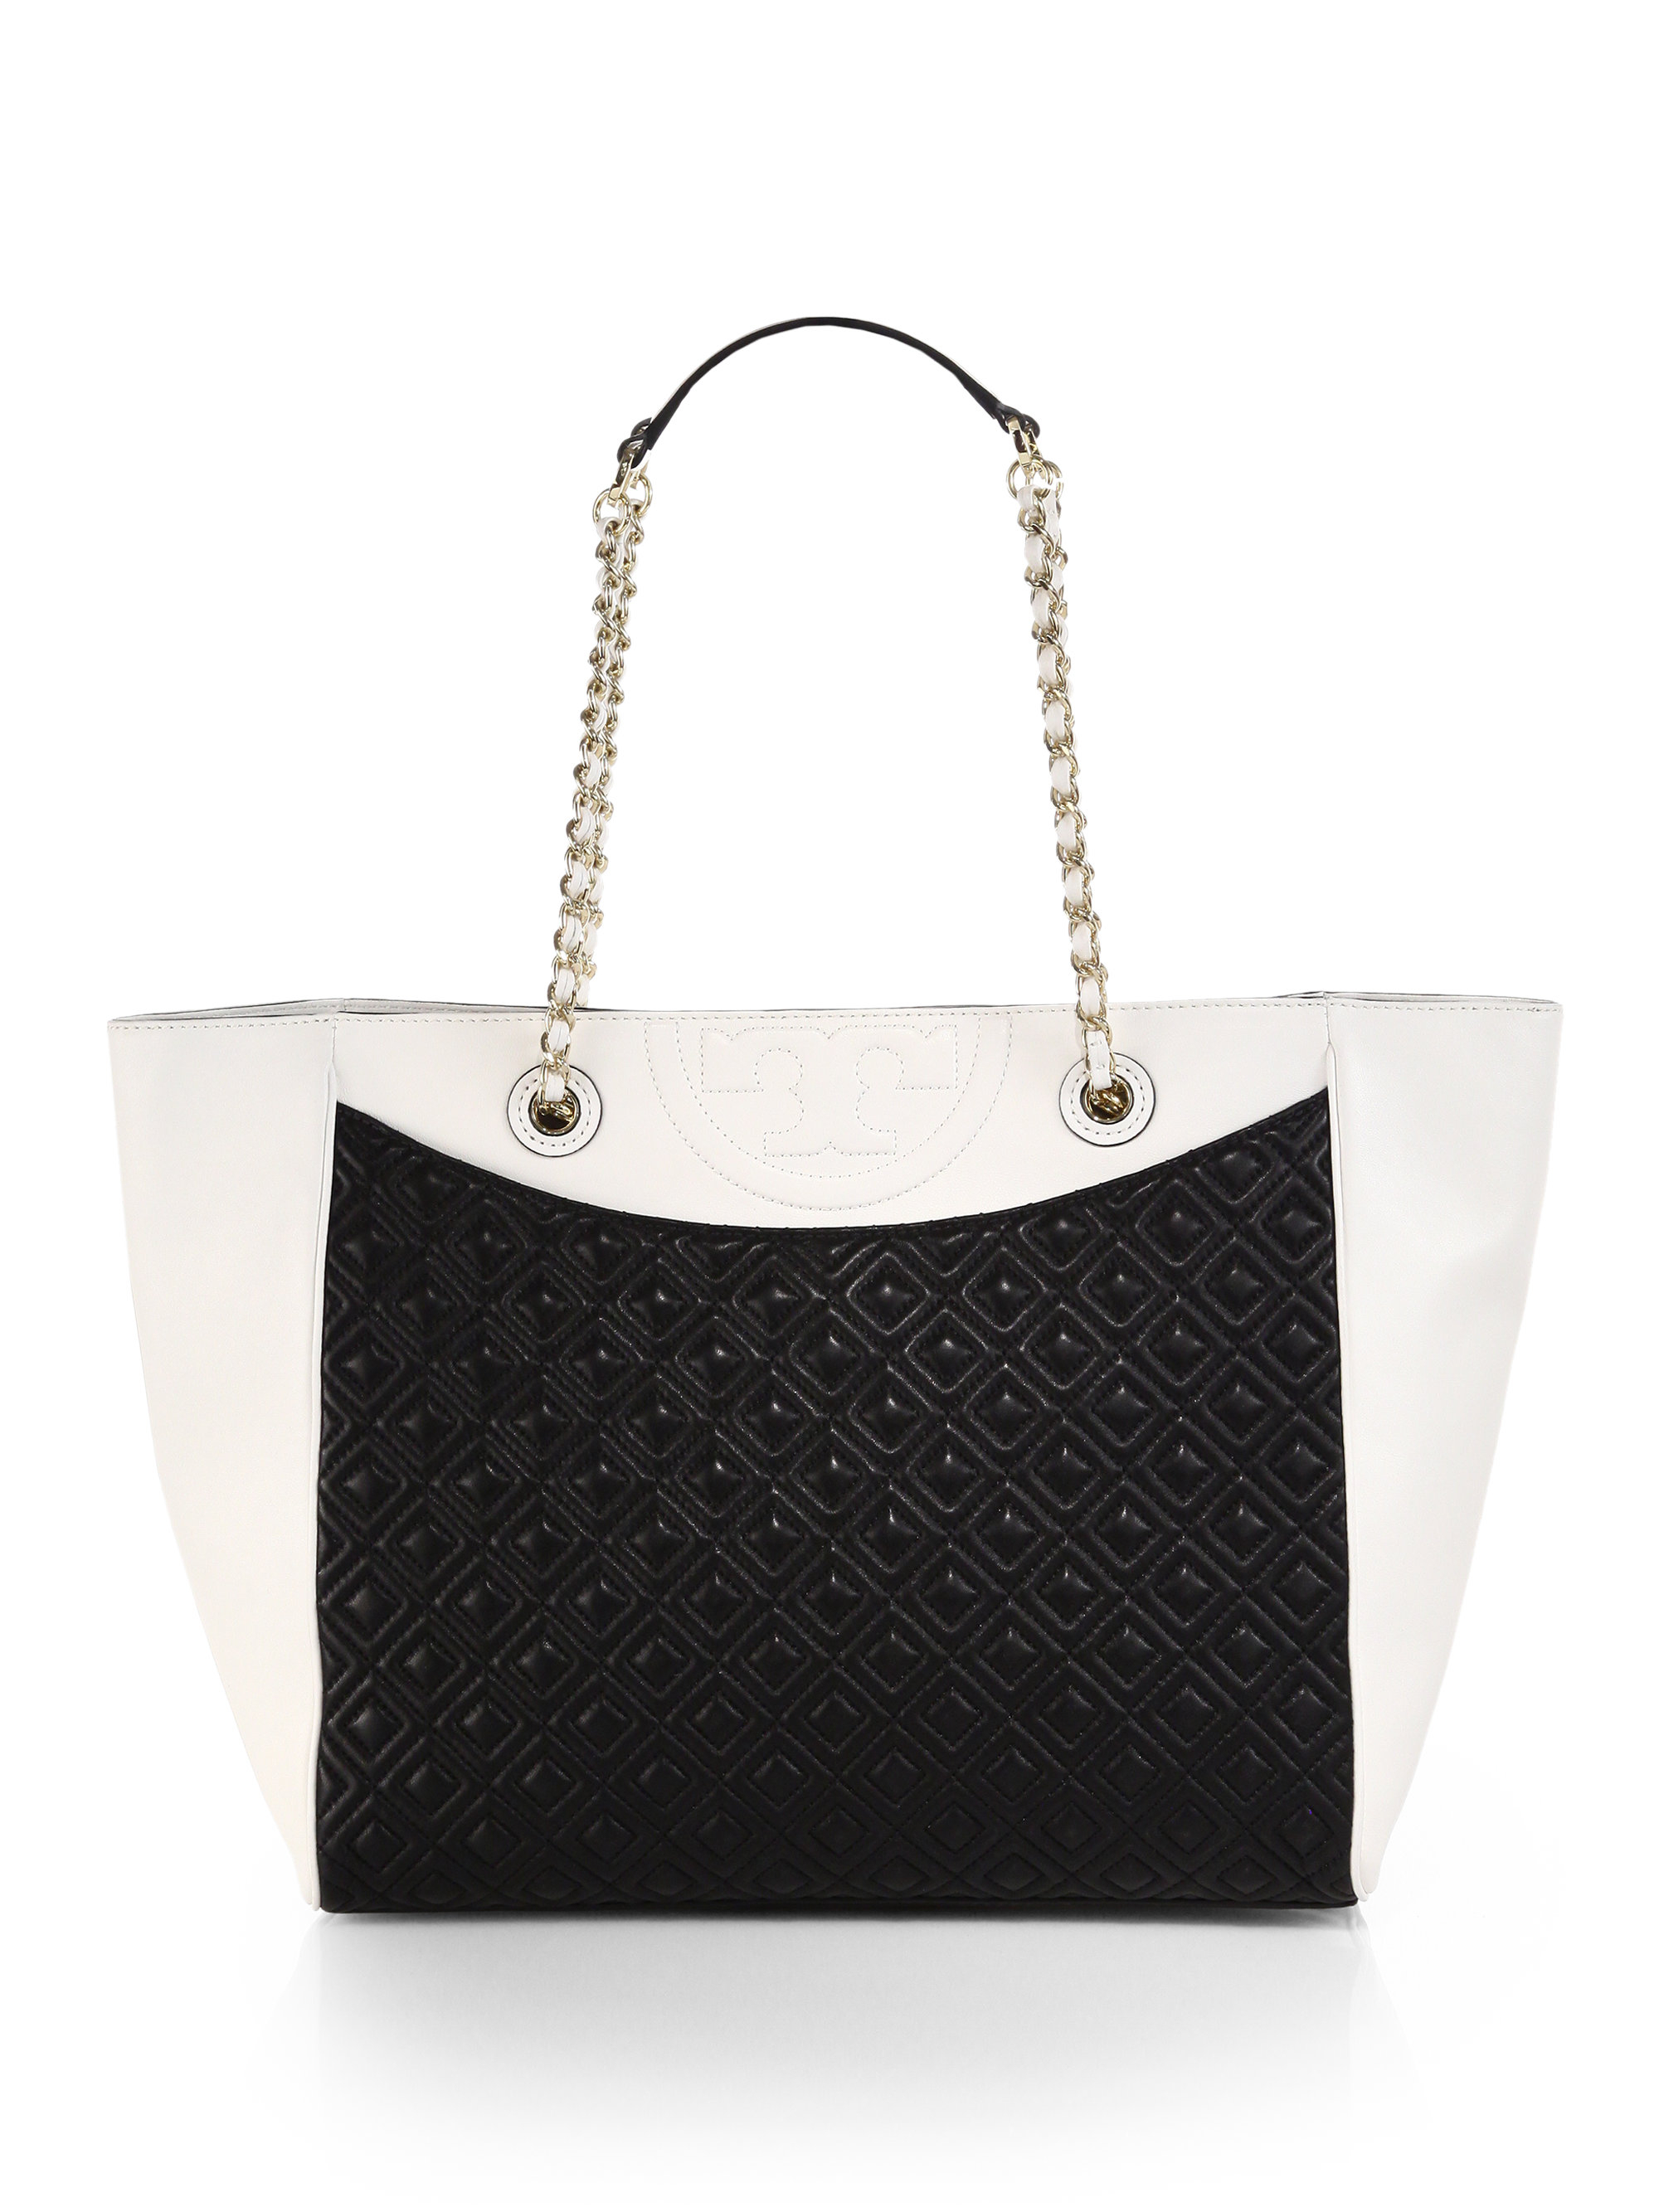 Tory Burch Fleming Quilted Colorblock Tote in Black | Lyst